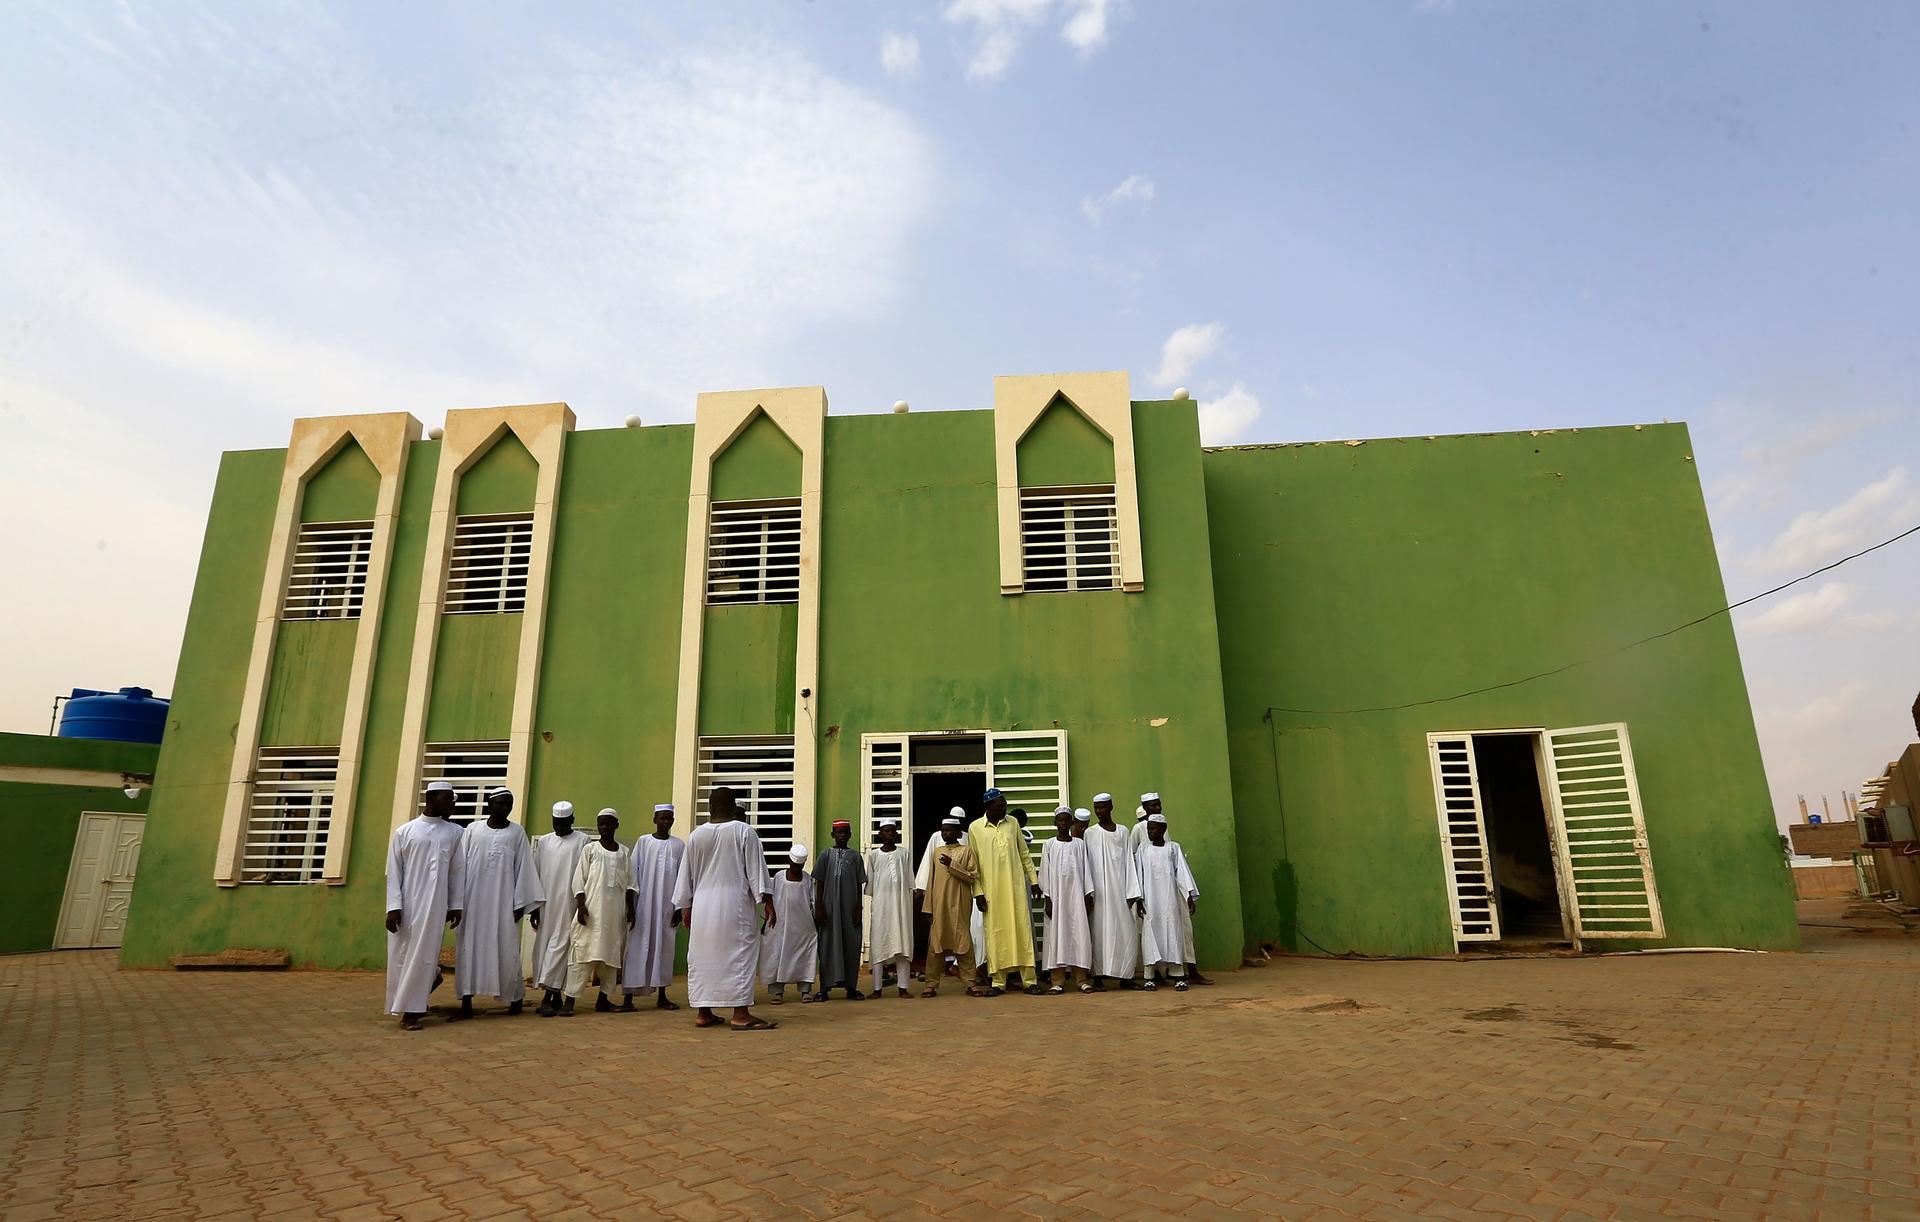 A group of men are shown in traditional Islamic robes outside of the green facade of the Haj Yousif Mosque.